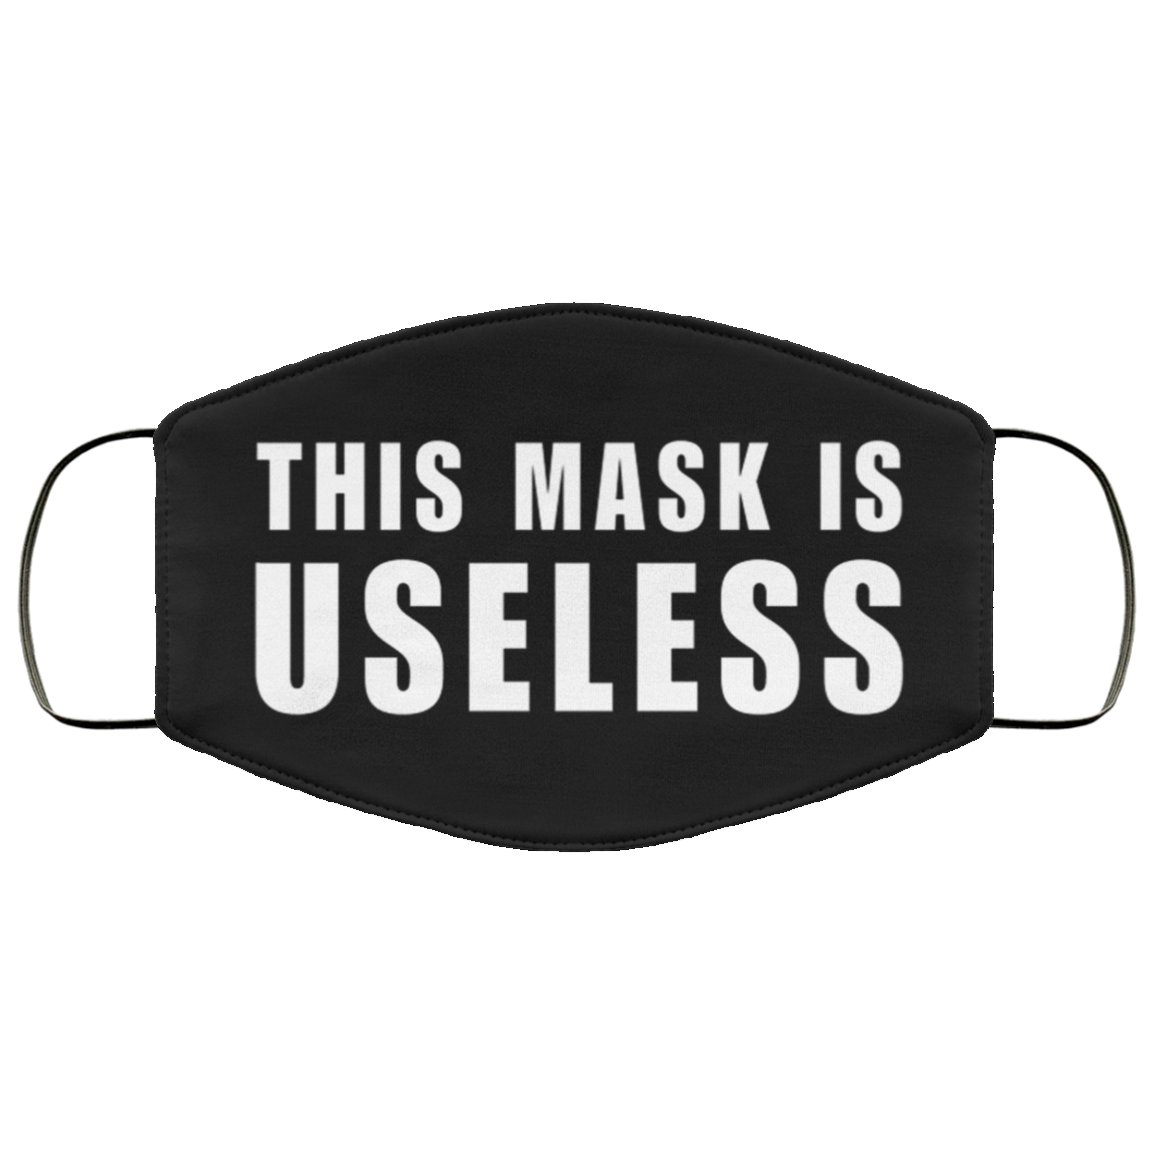 This mask is useless face mask - Rockatee